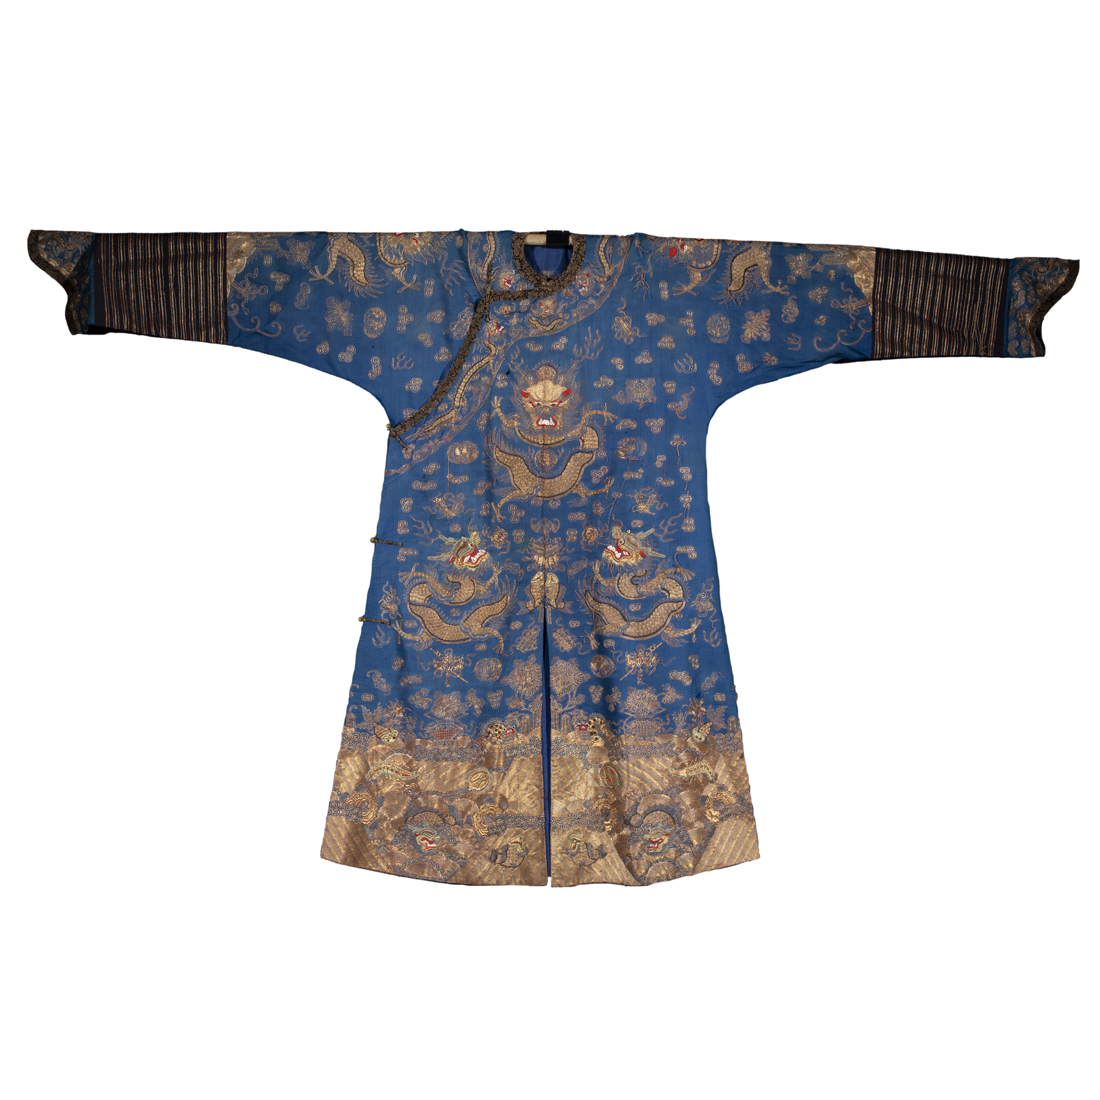 CHINESE EMBROIDERED BLUE GROUND 3a1585